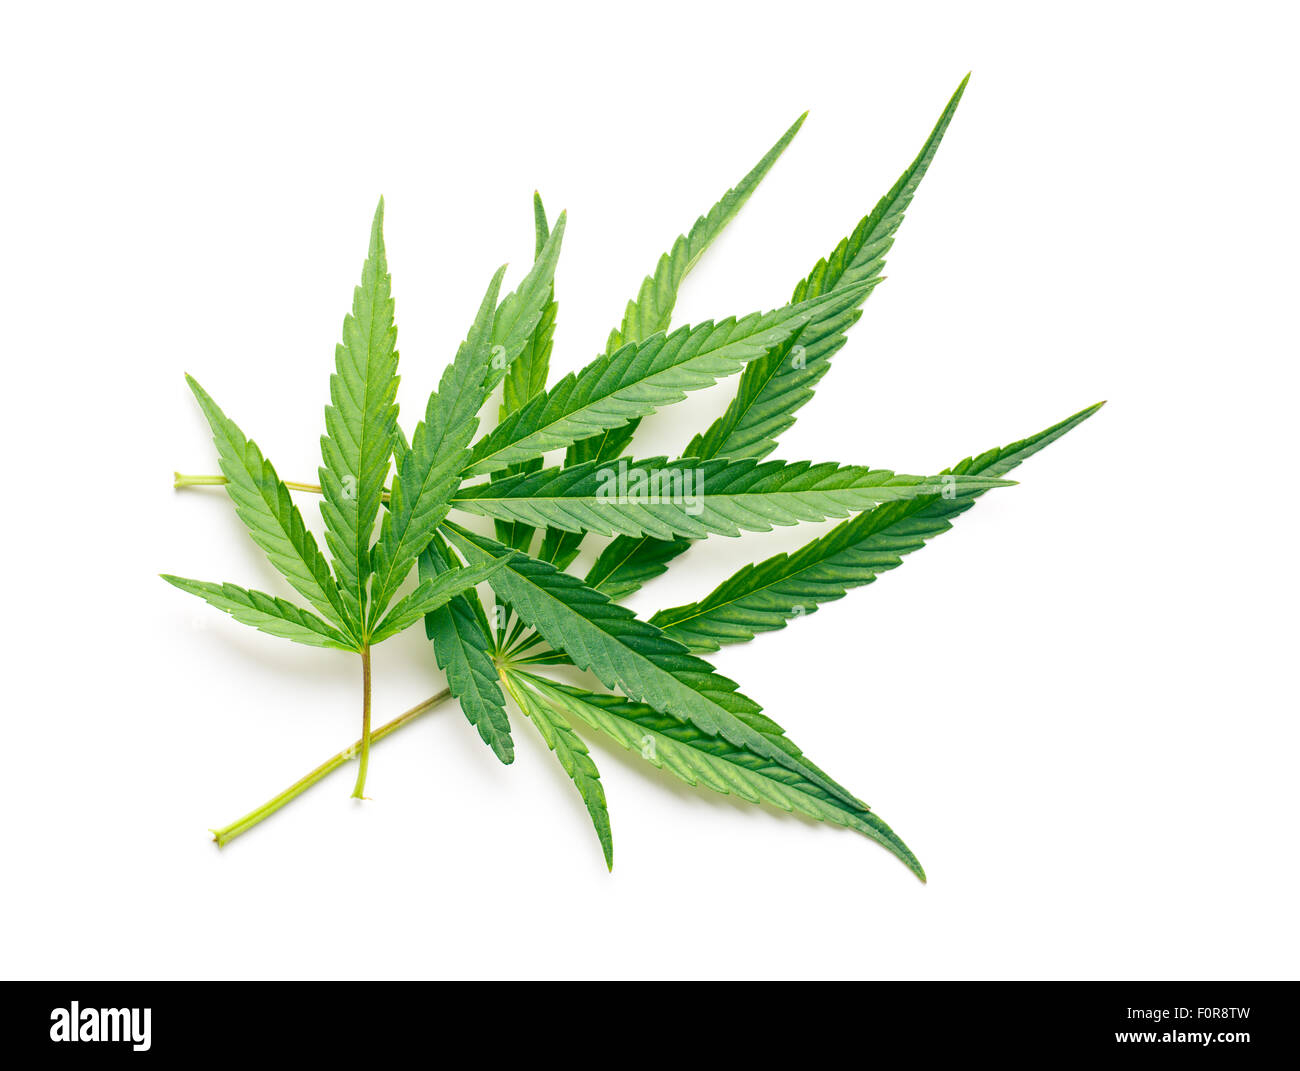 cannabis leaves on white background Stock Photo